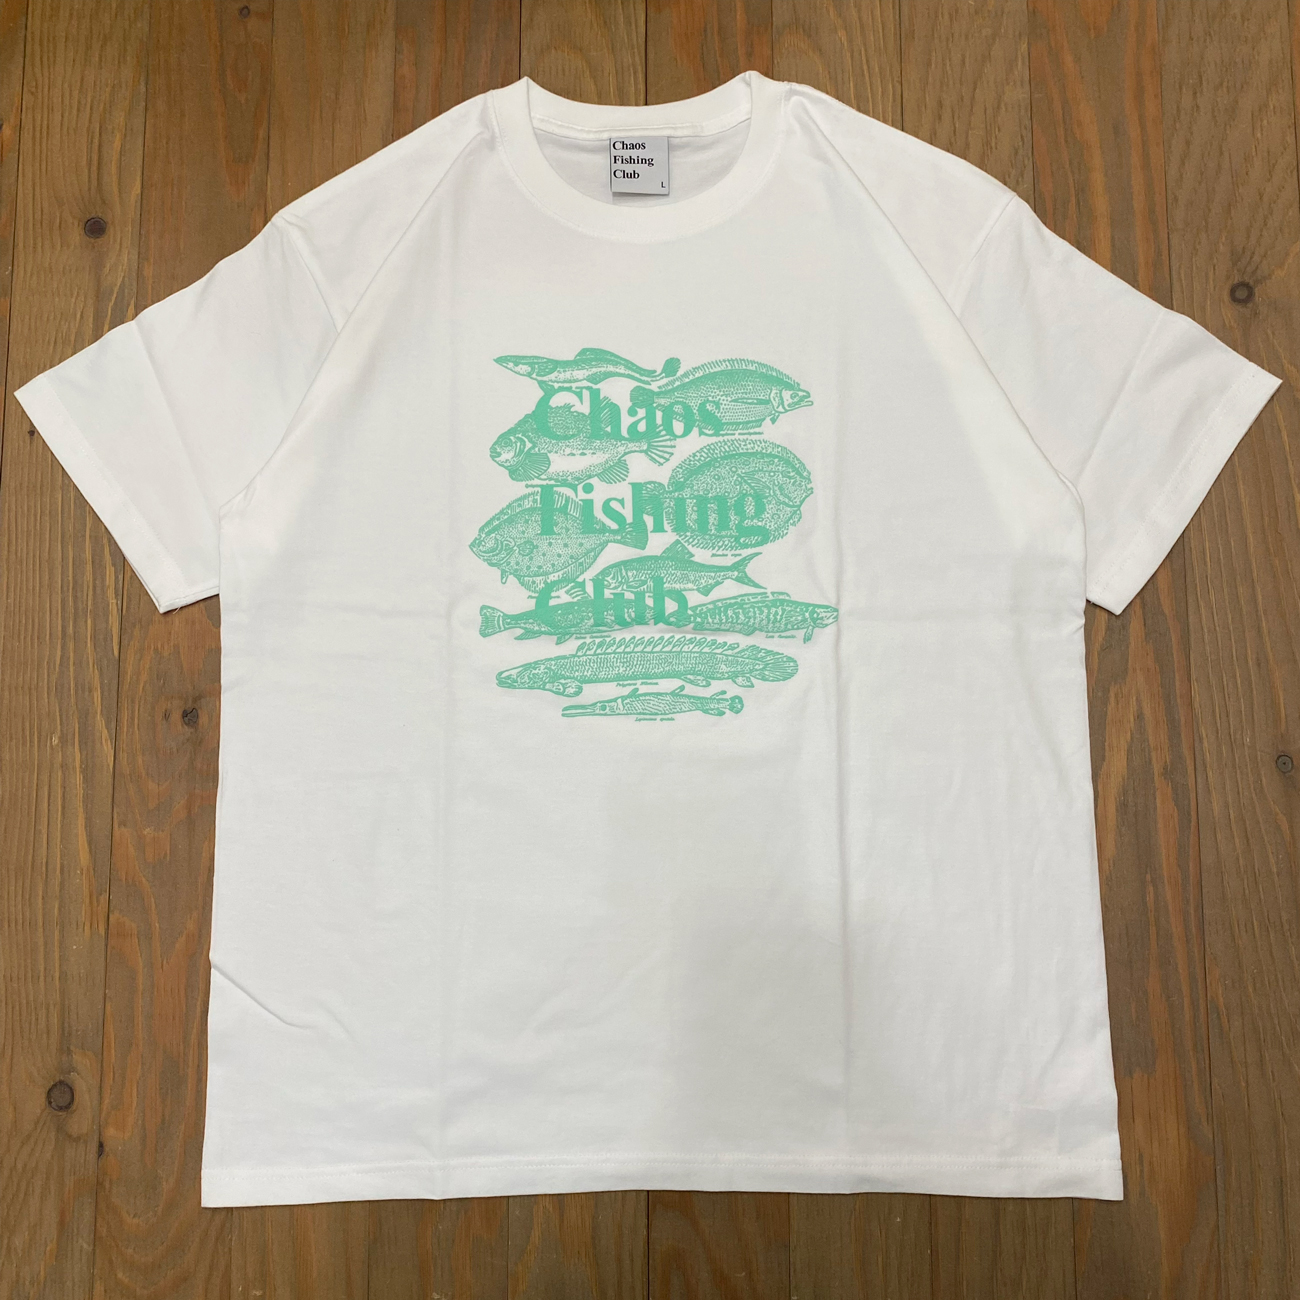 CHAOS FISHING CLUB PICTURE BOOK TEE